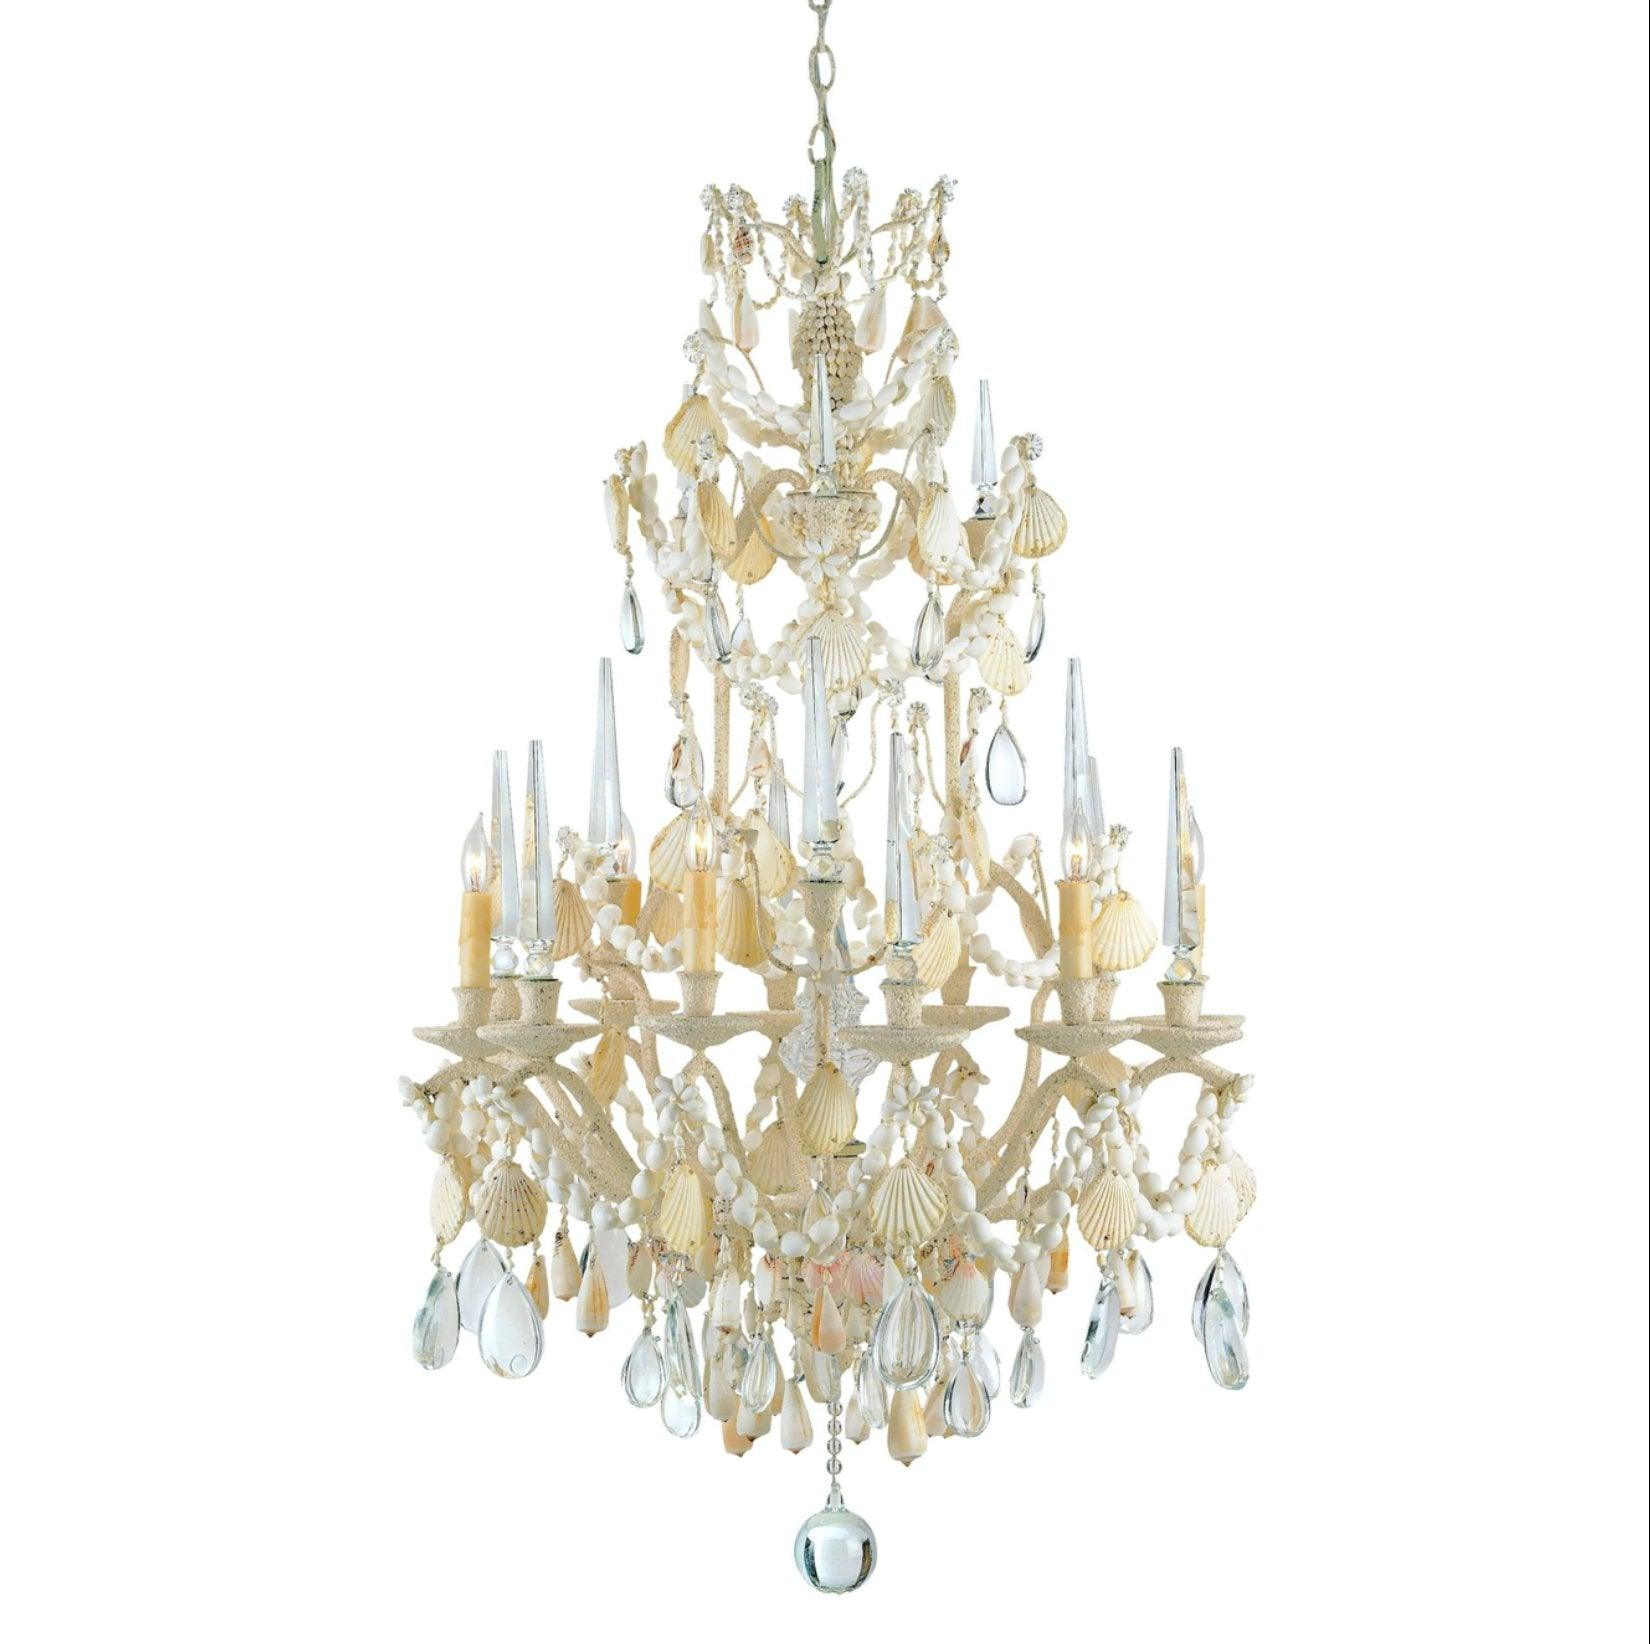 Chandeliers - Casey & Company